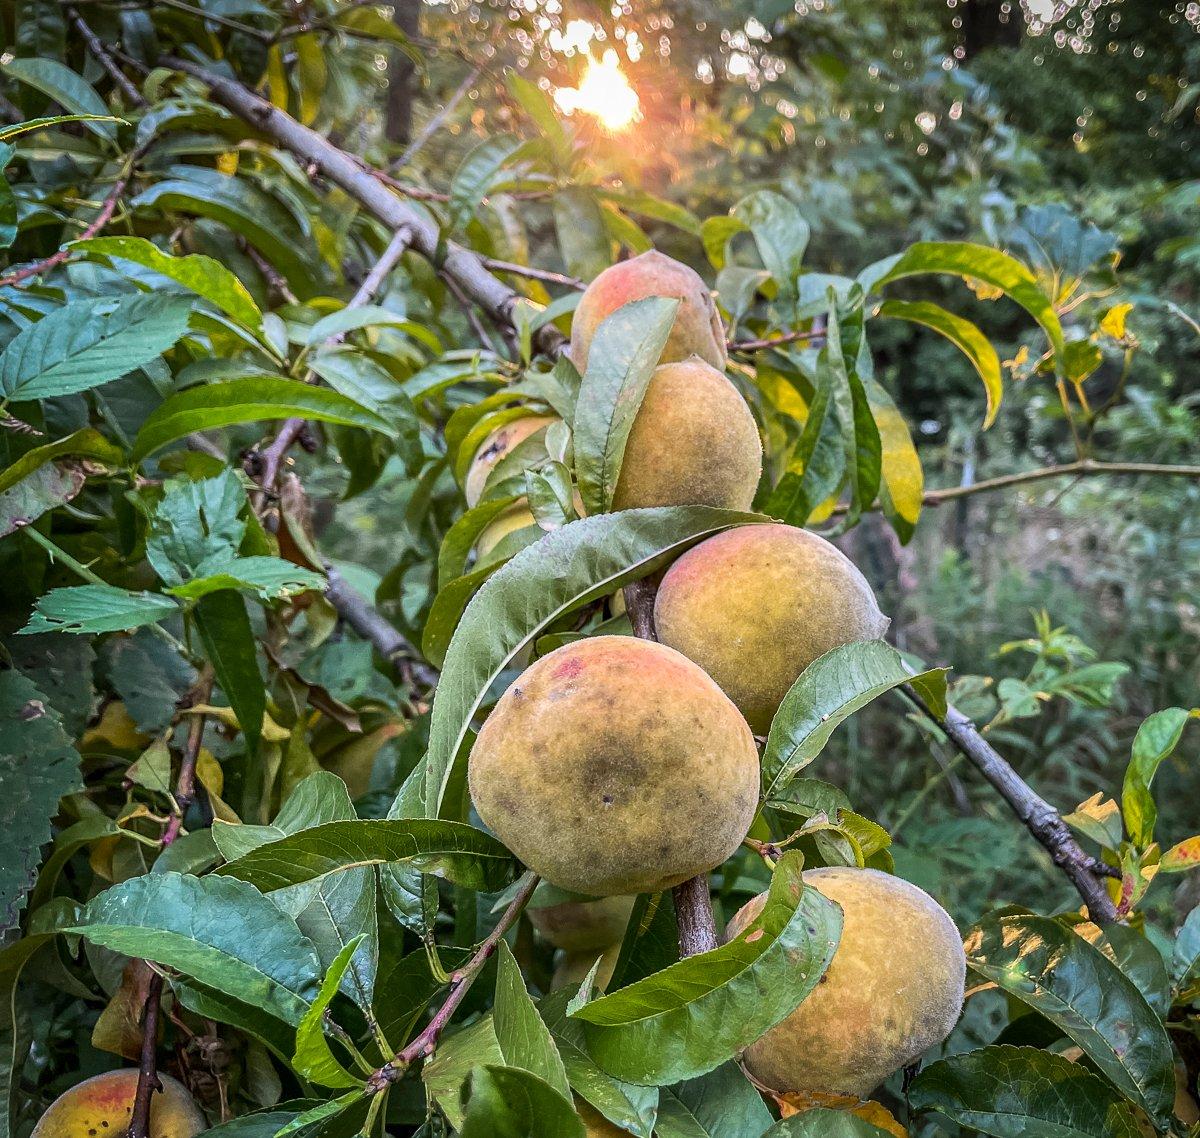 Every few years, the old peach tree next to our squirrel hunting spot actually bears fruit.